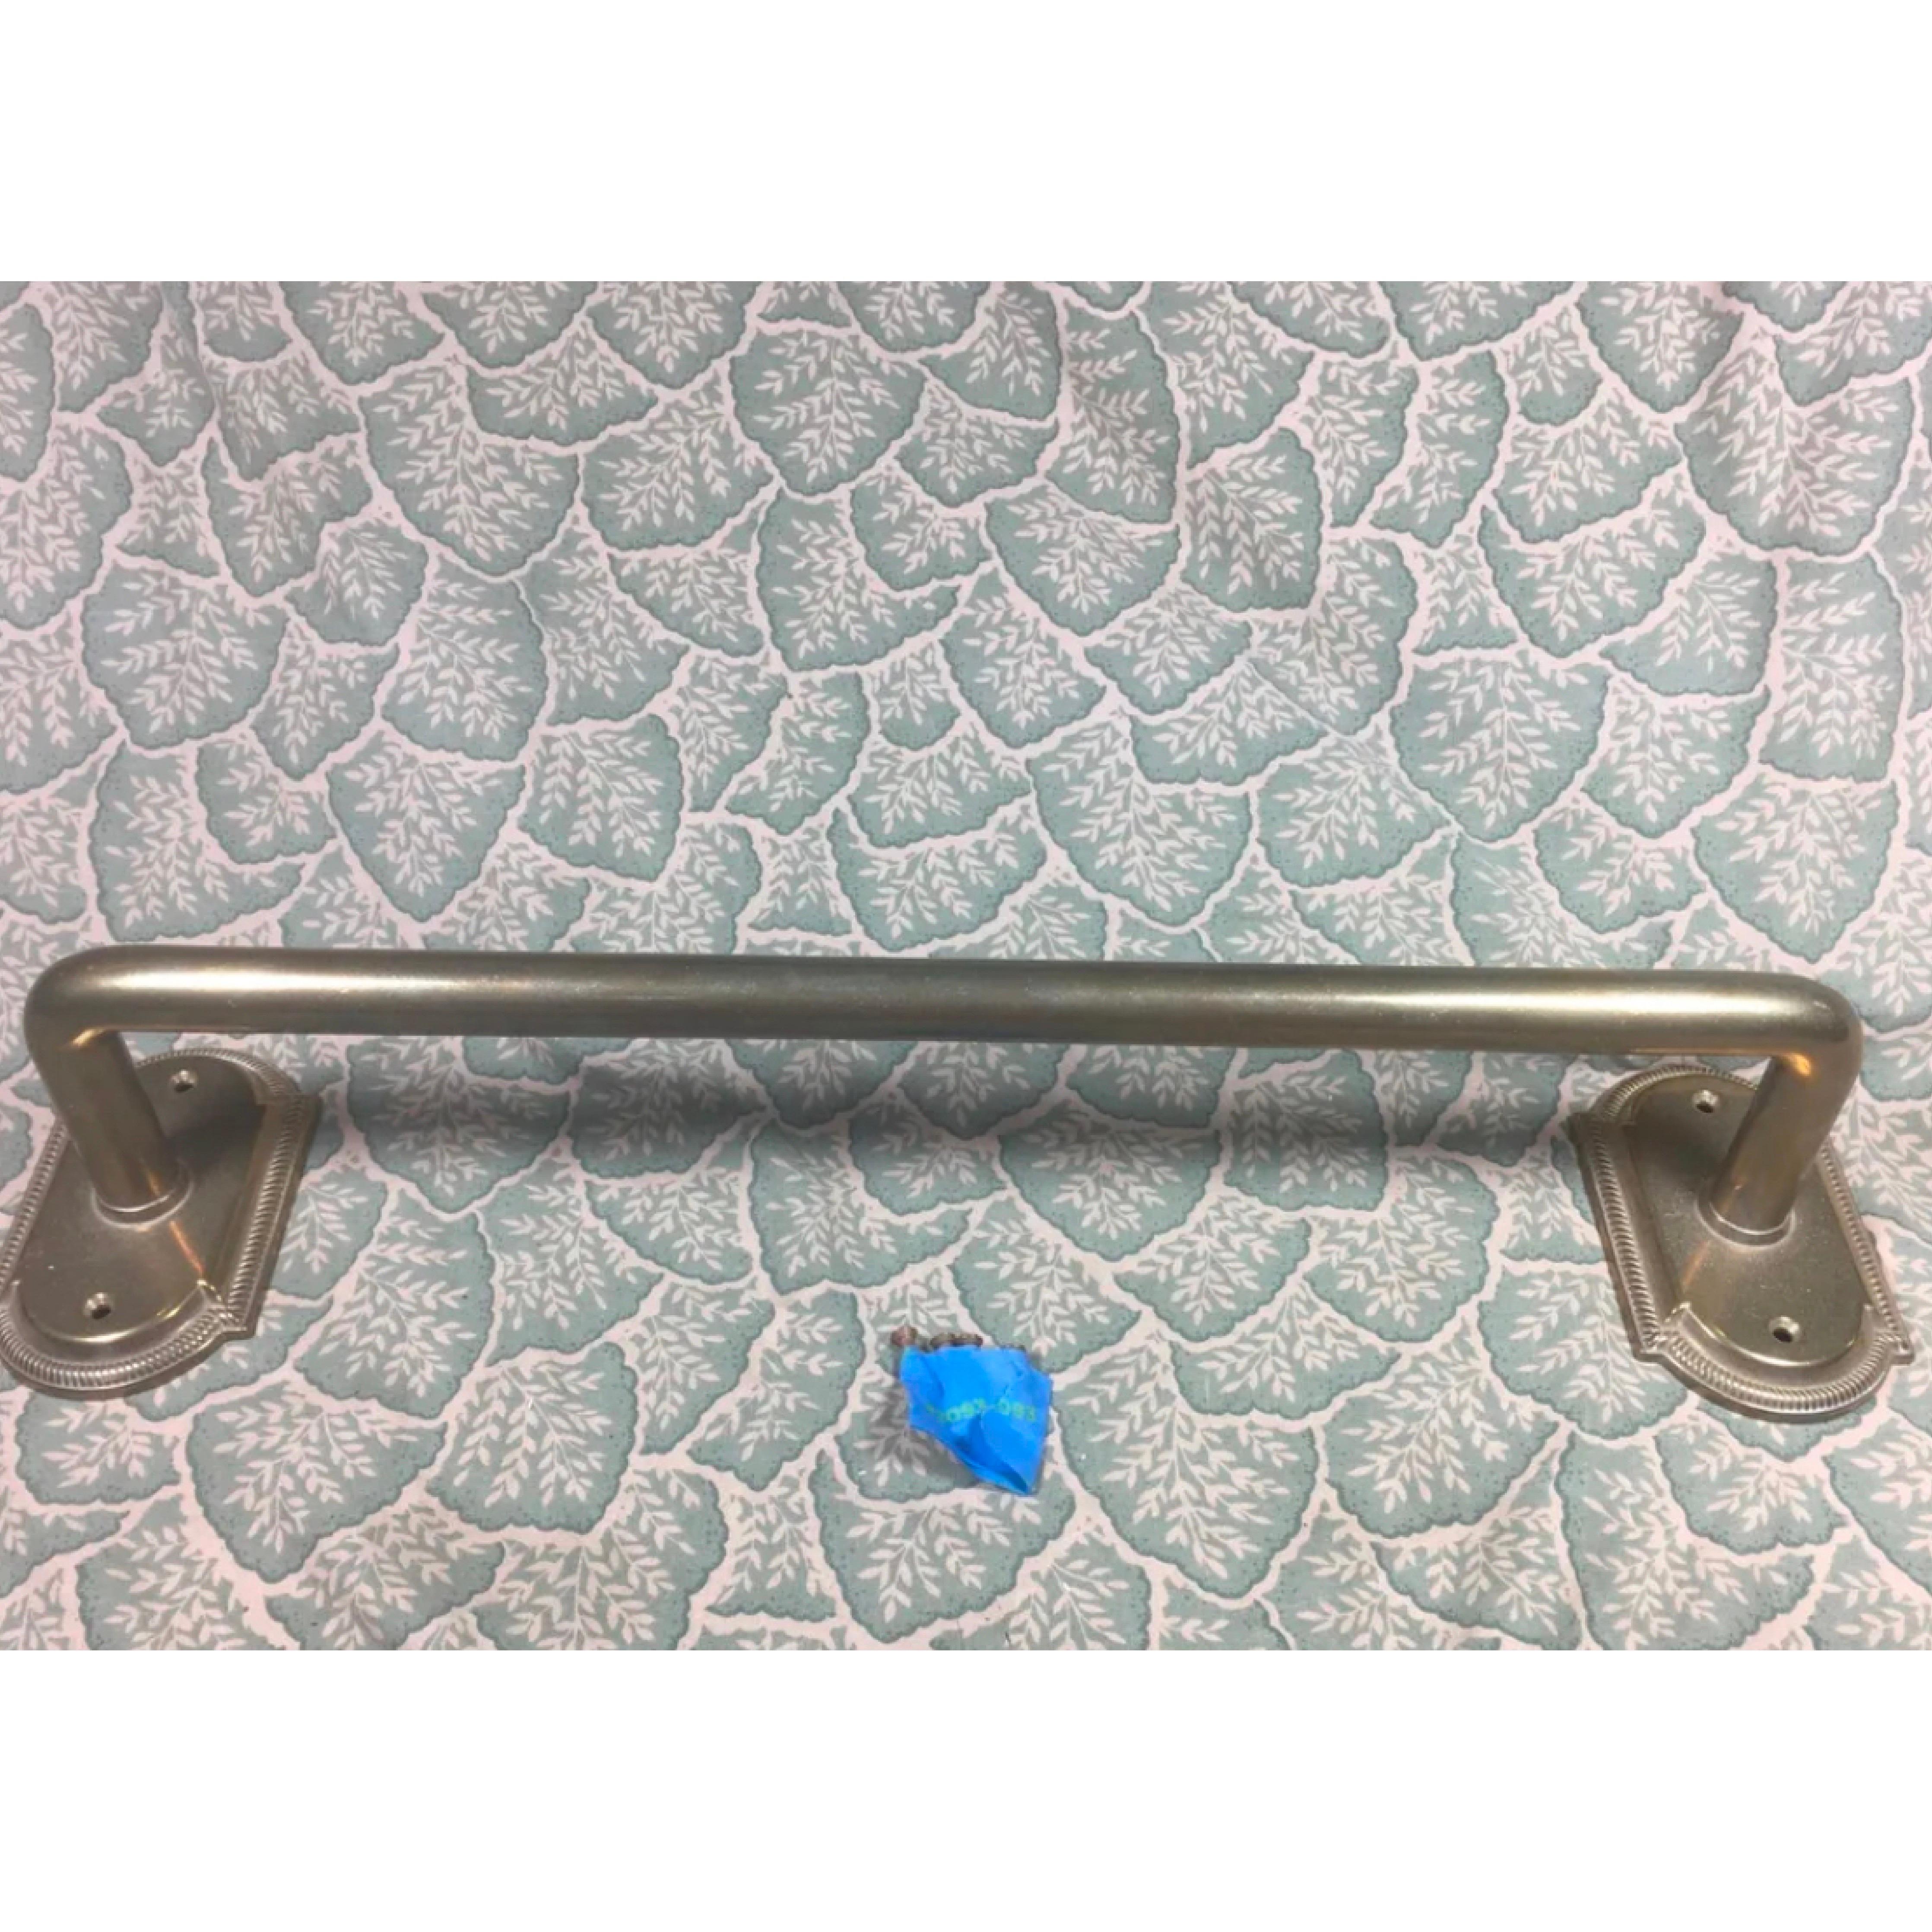 Rocky Mountain Bronze Continuous Towel Bar, 18” Silicon Bronze Light, USA, 2023. Ellis escutcheons.  18” length, 4 3/8” projection.  Gorgeous bronze piece. Crafted by hand in USA.  